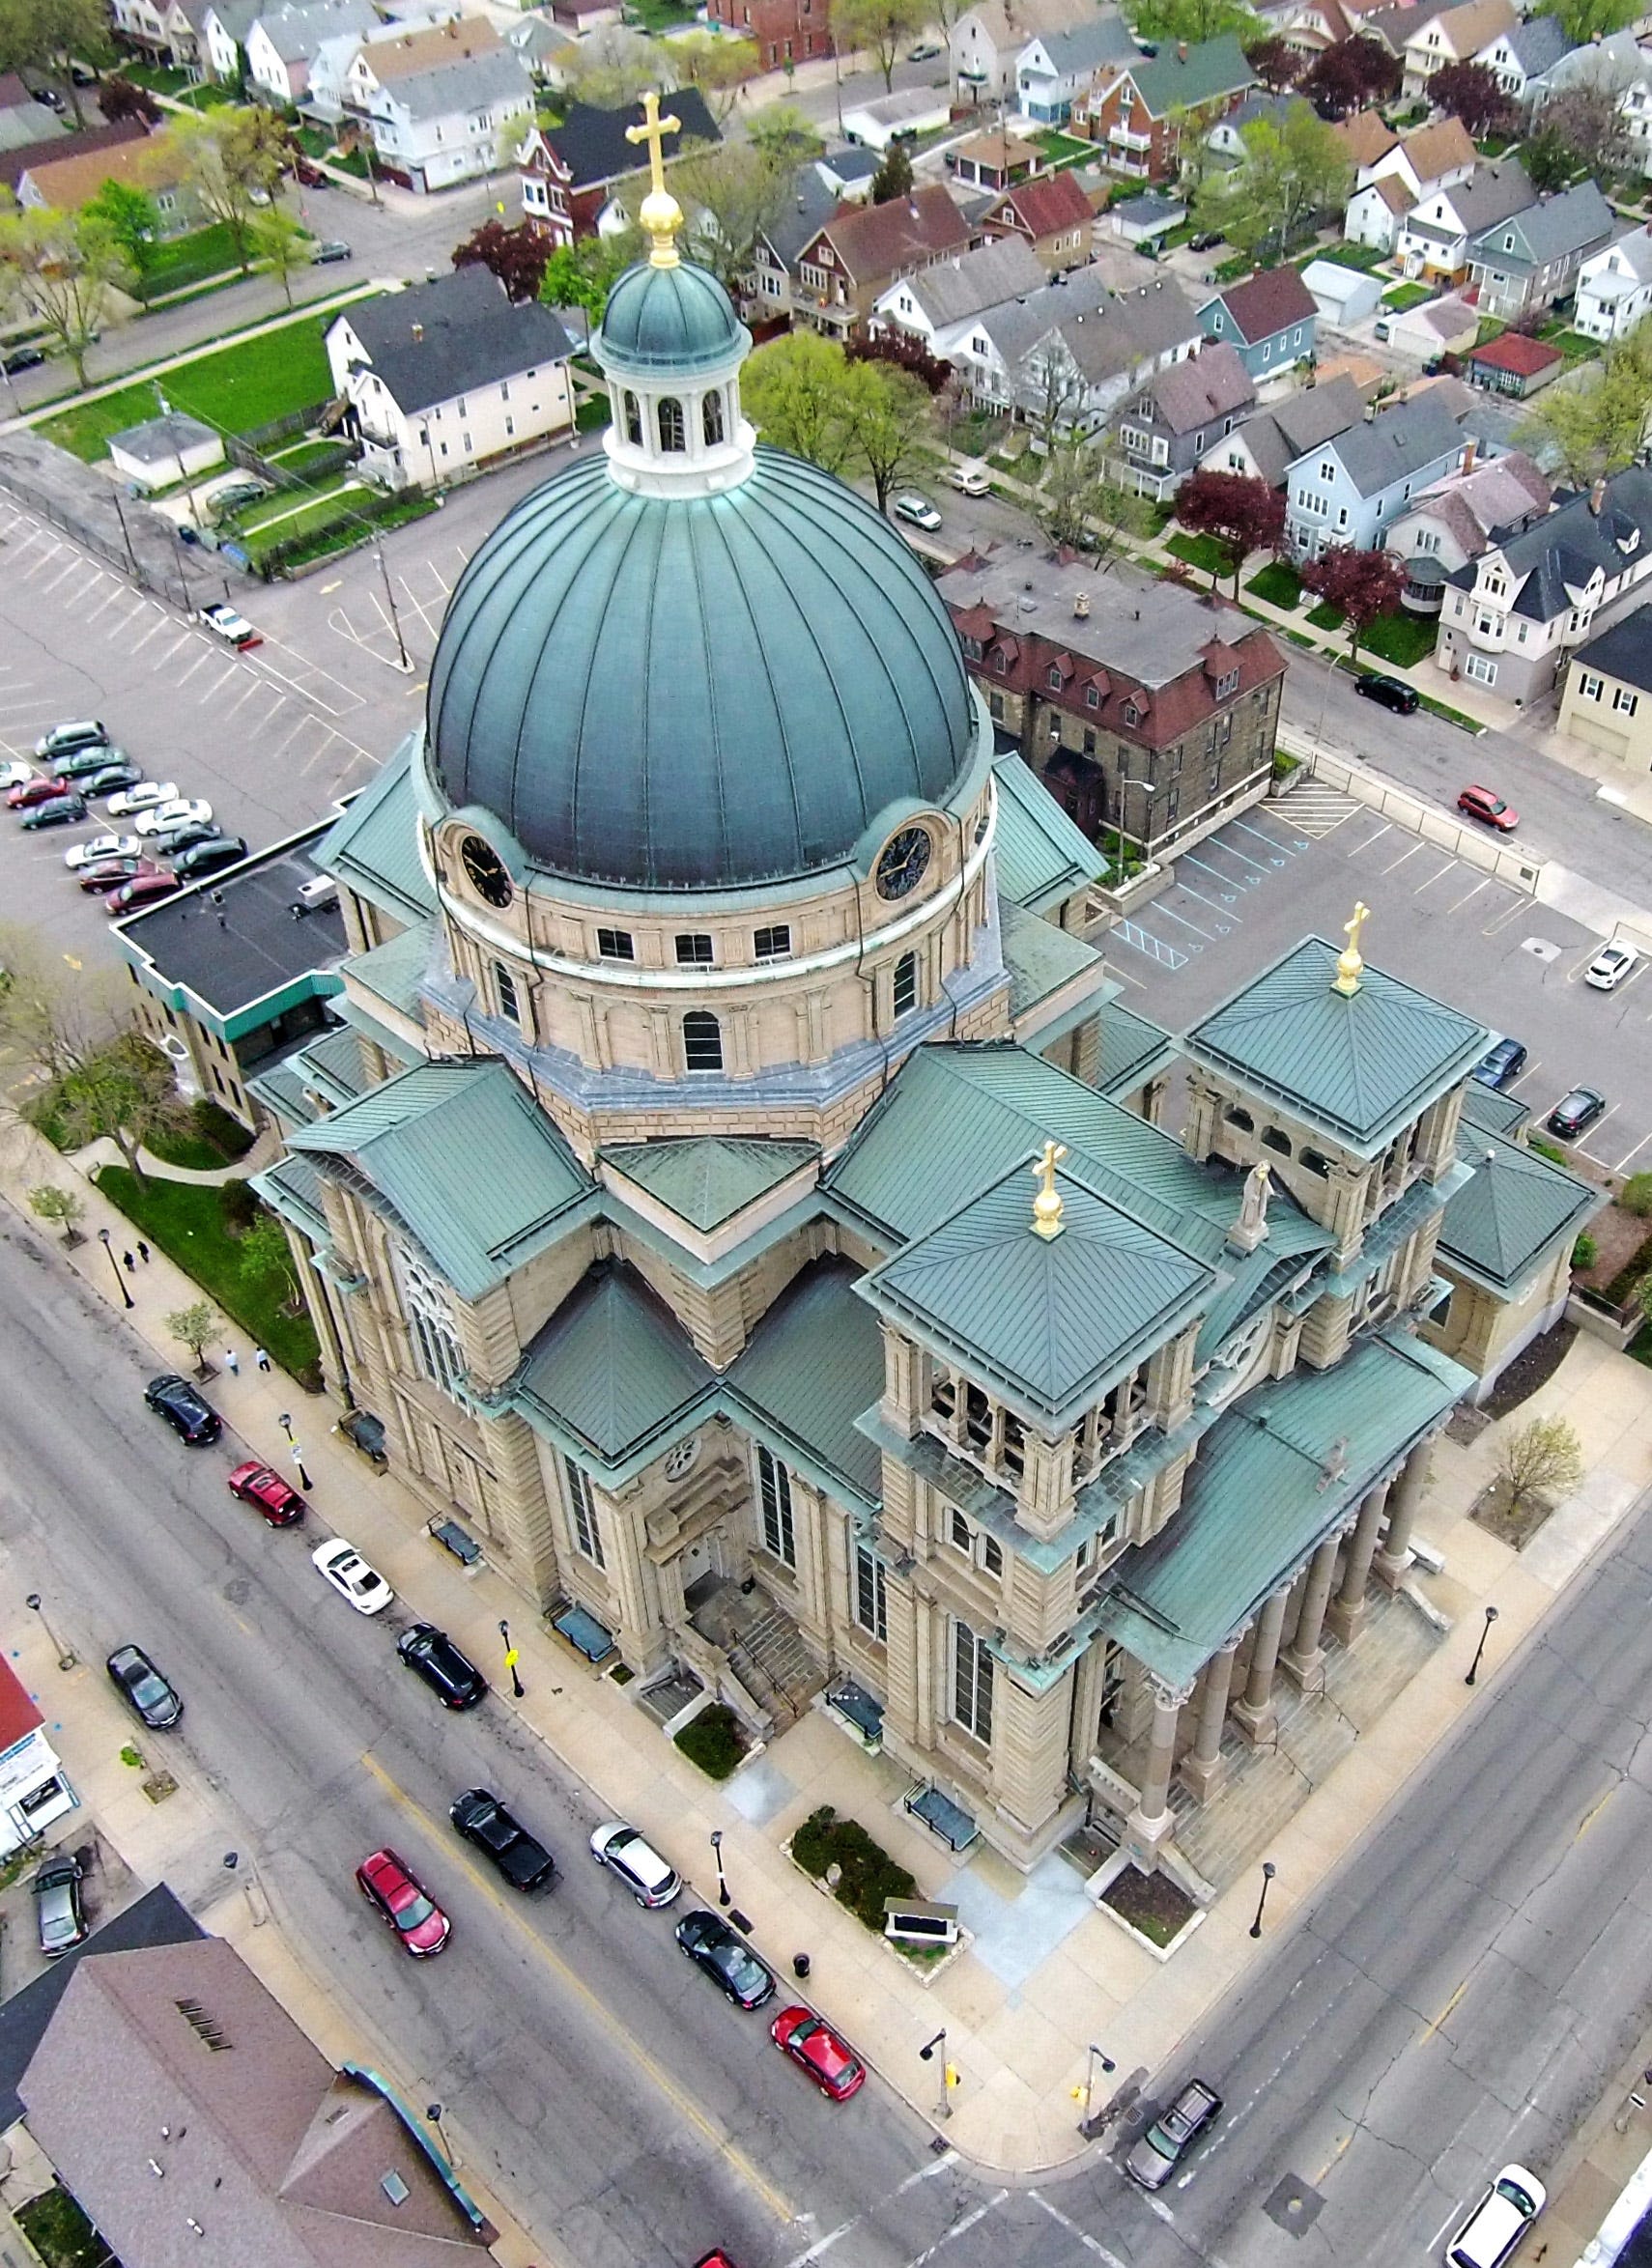 About Milwaukee's Basilica of St. Josaphat